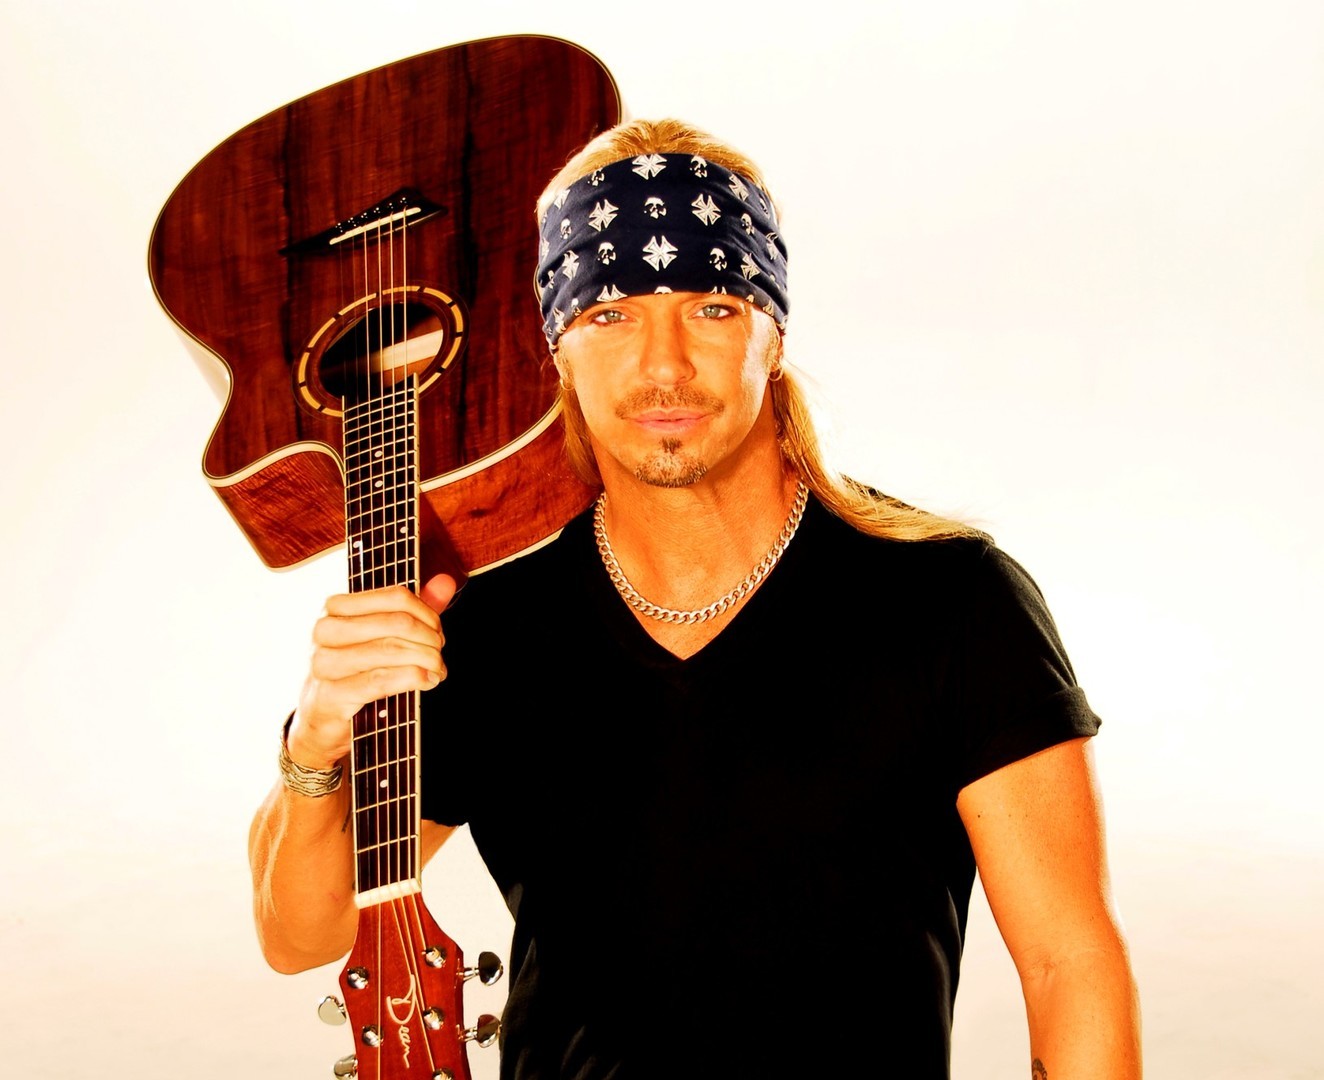 Bret Michaels - Nothin' But a Good Vibe 2022 LIVE at Hollywood Casino, Charles Town, Charles Town, West Virginia, United States